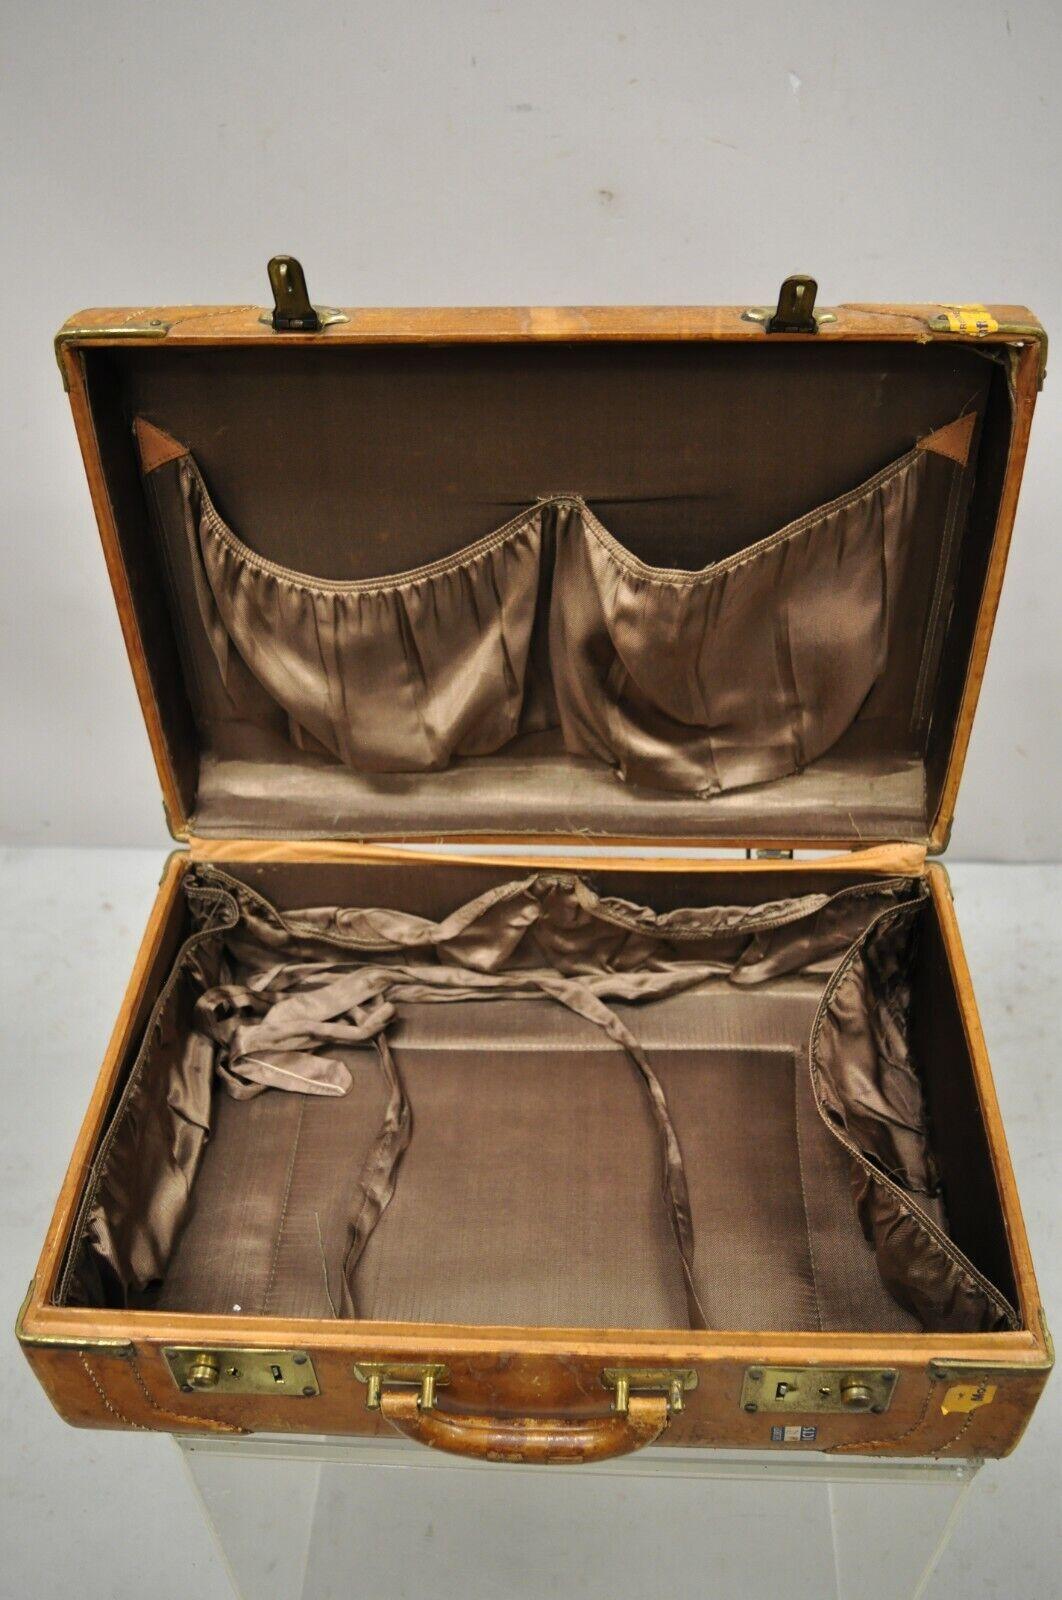 Vintage Brown Caramel Leather Hard Case Suitcase Luggage Trunk with Patina In Good Condition For Sale In Philadelphia, PA